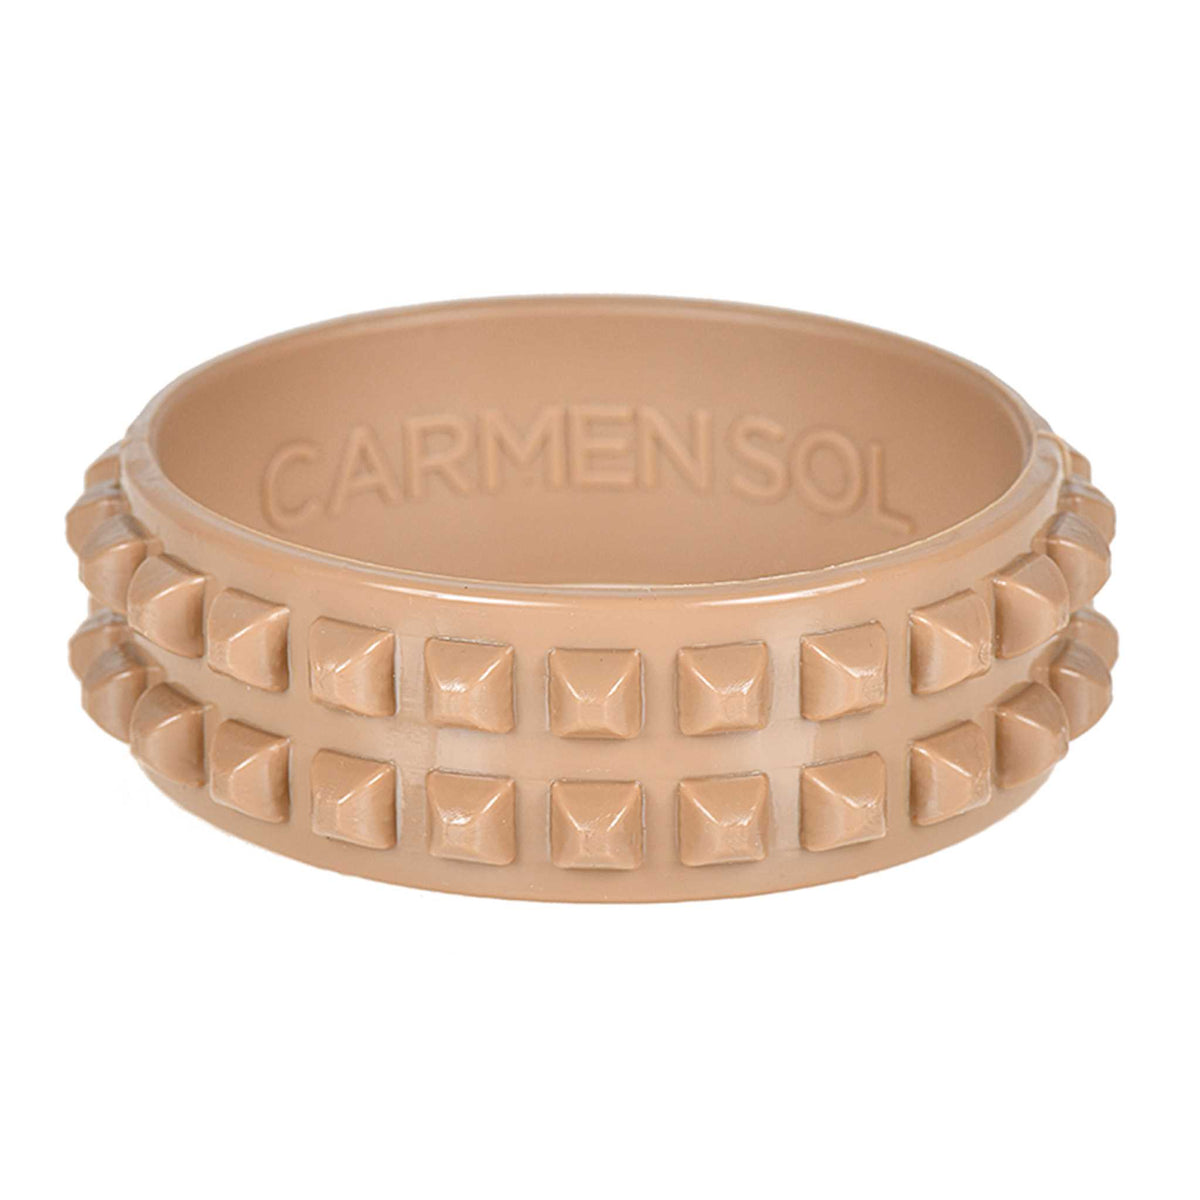 Nude color bracelet in jelly materia with studs